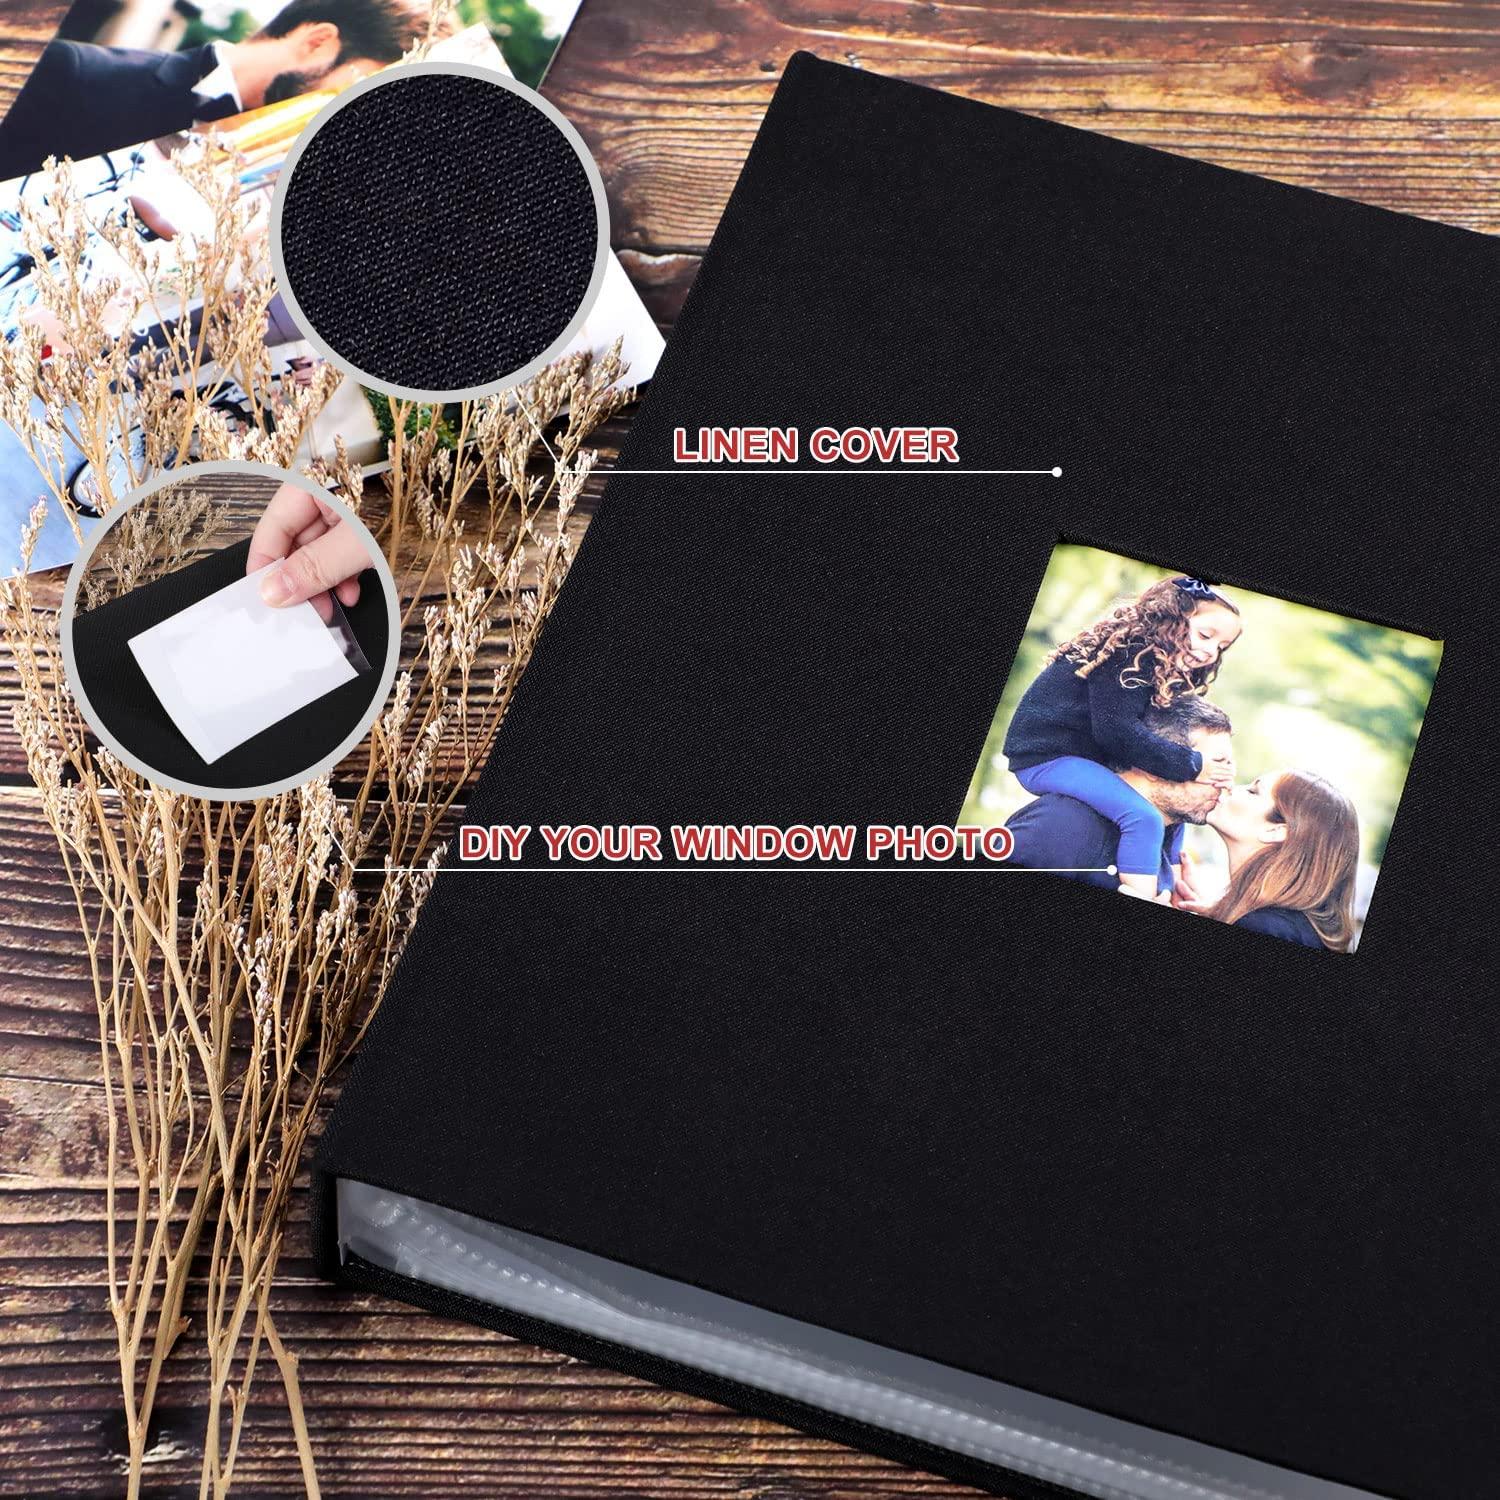  Lanpn Photo Album 4x6 1000 Pockets, Extra Large Capacity Linen  Cover Picture Albums Holds 1000 Horizontal and Vertical Photos Black : Home  & Kitchen